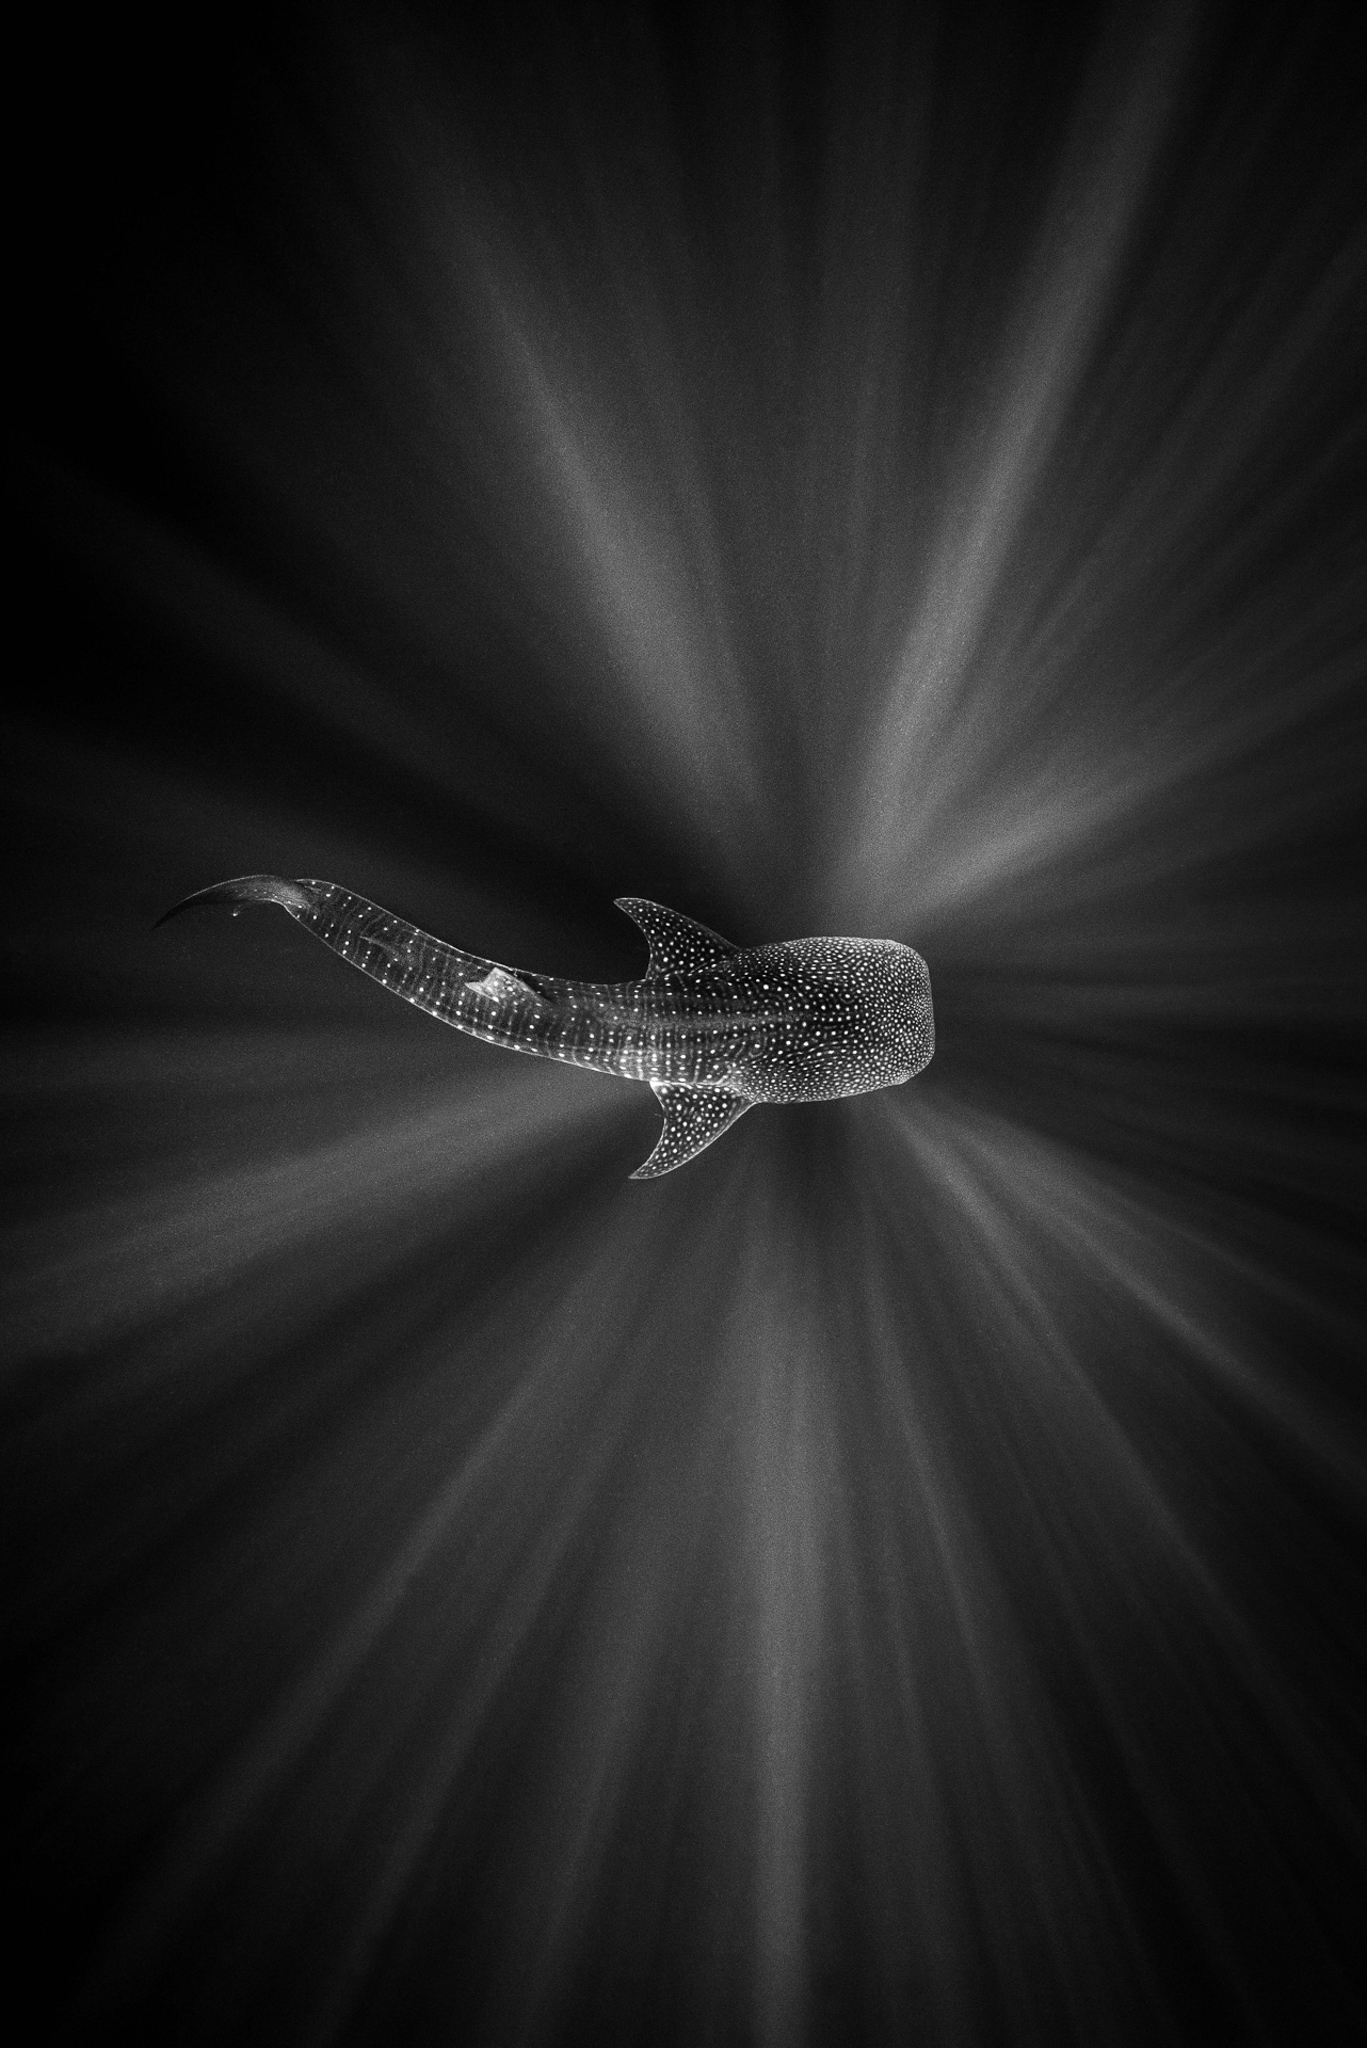 Whale shark with lines of light refracting around it